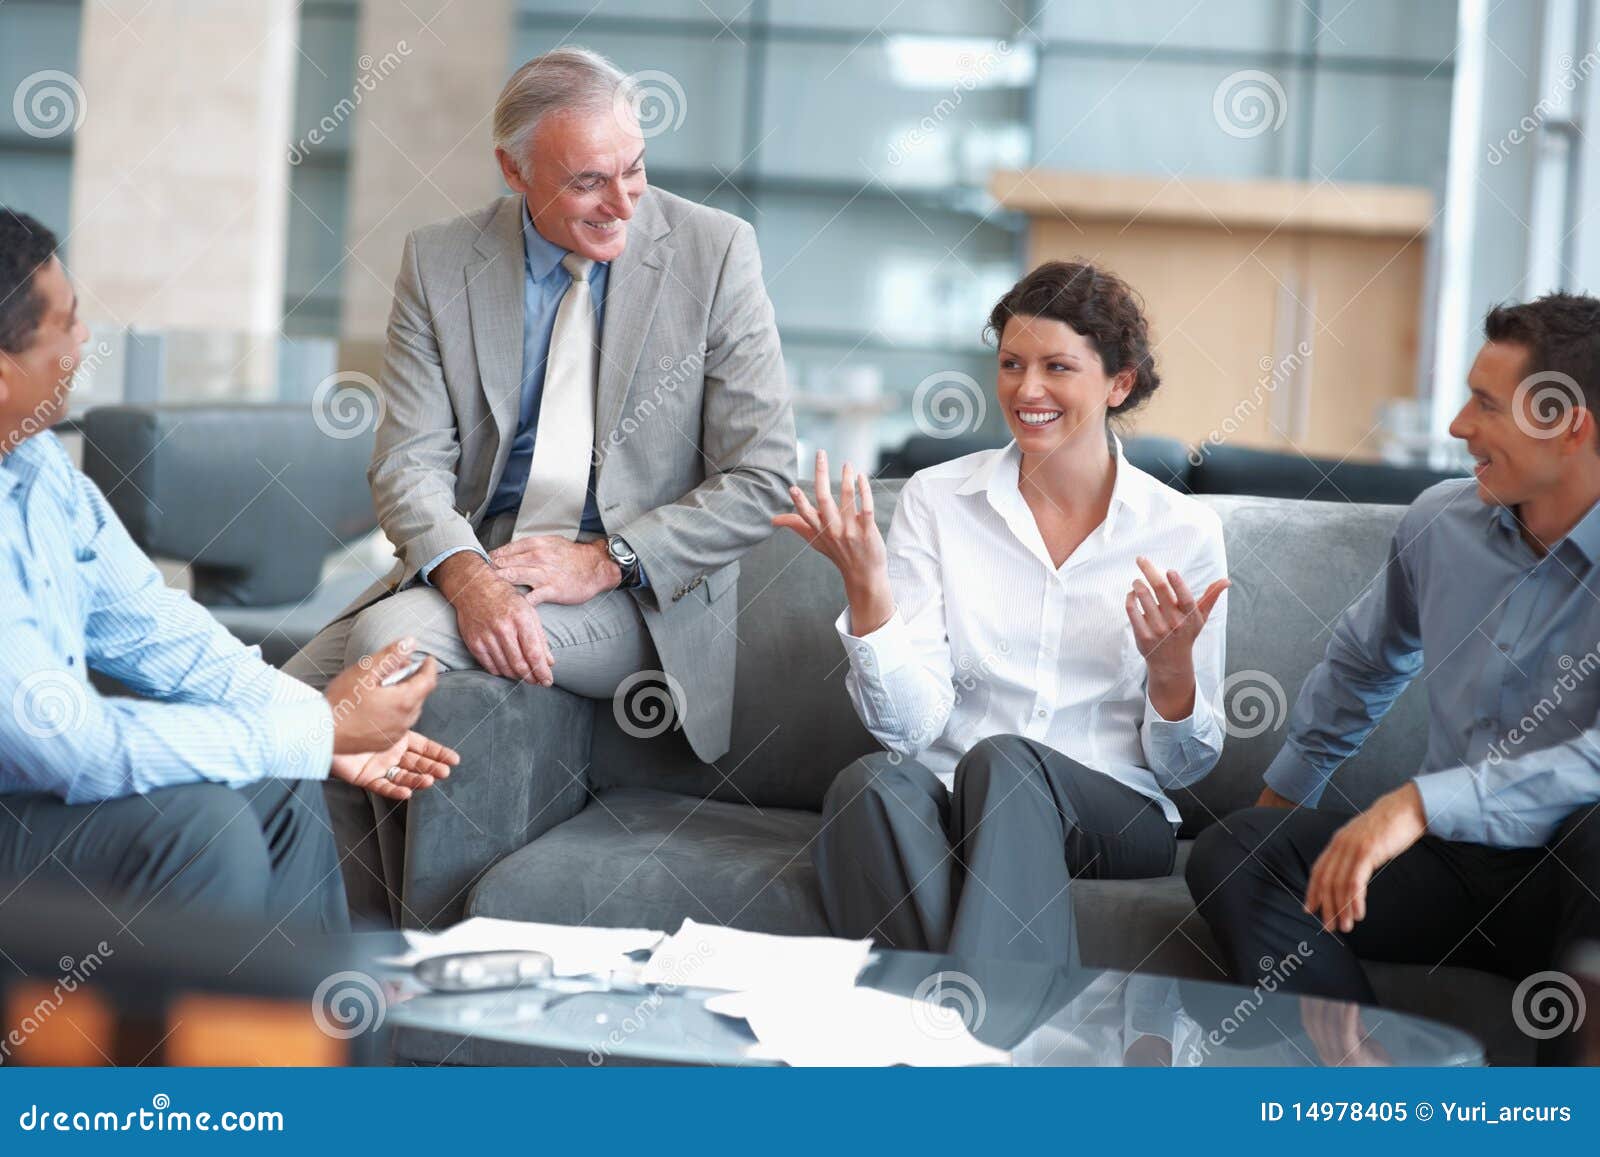 people enjoying a casual talk at the office lounge